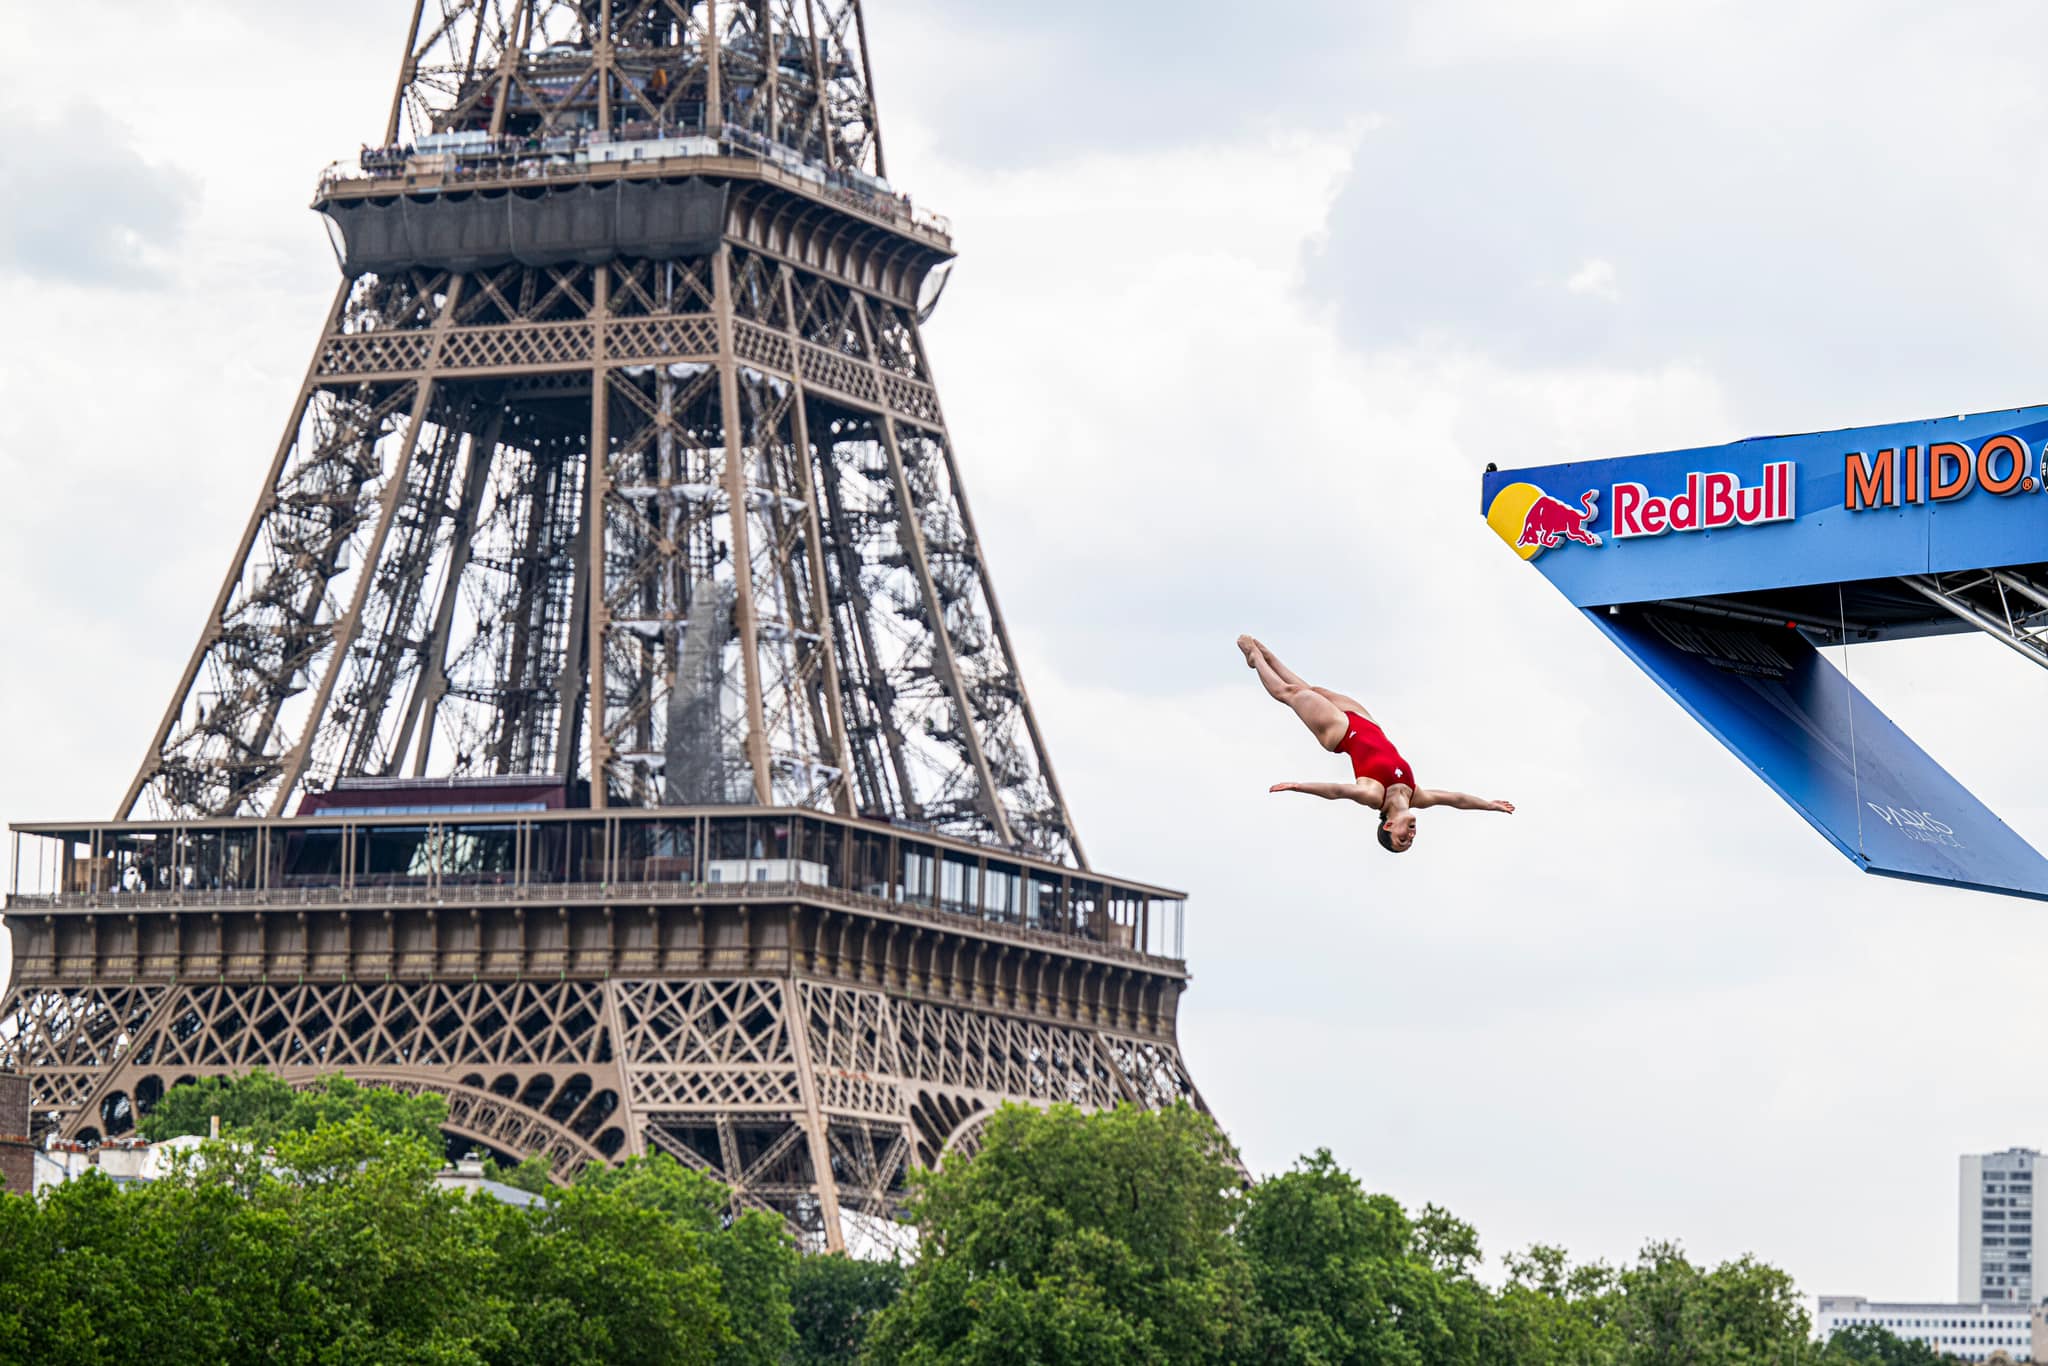 Molly Carlson on the Second Step of the Podium in Paris; Simone Leathead Makes her Red Bull debut